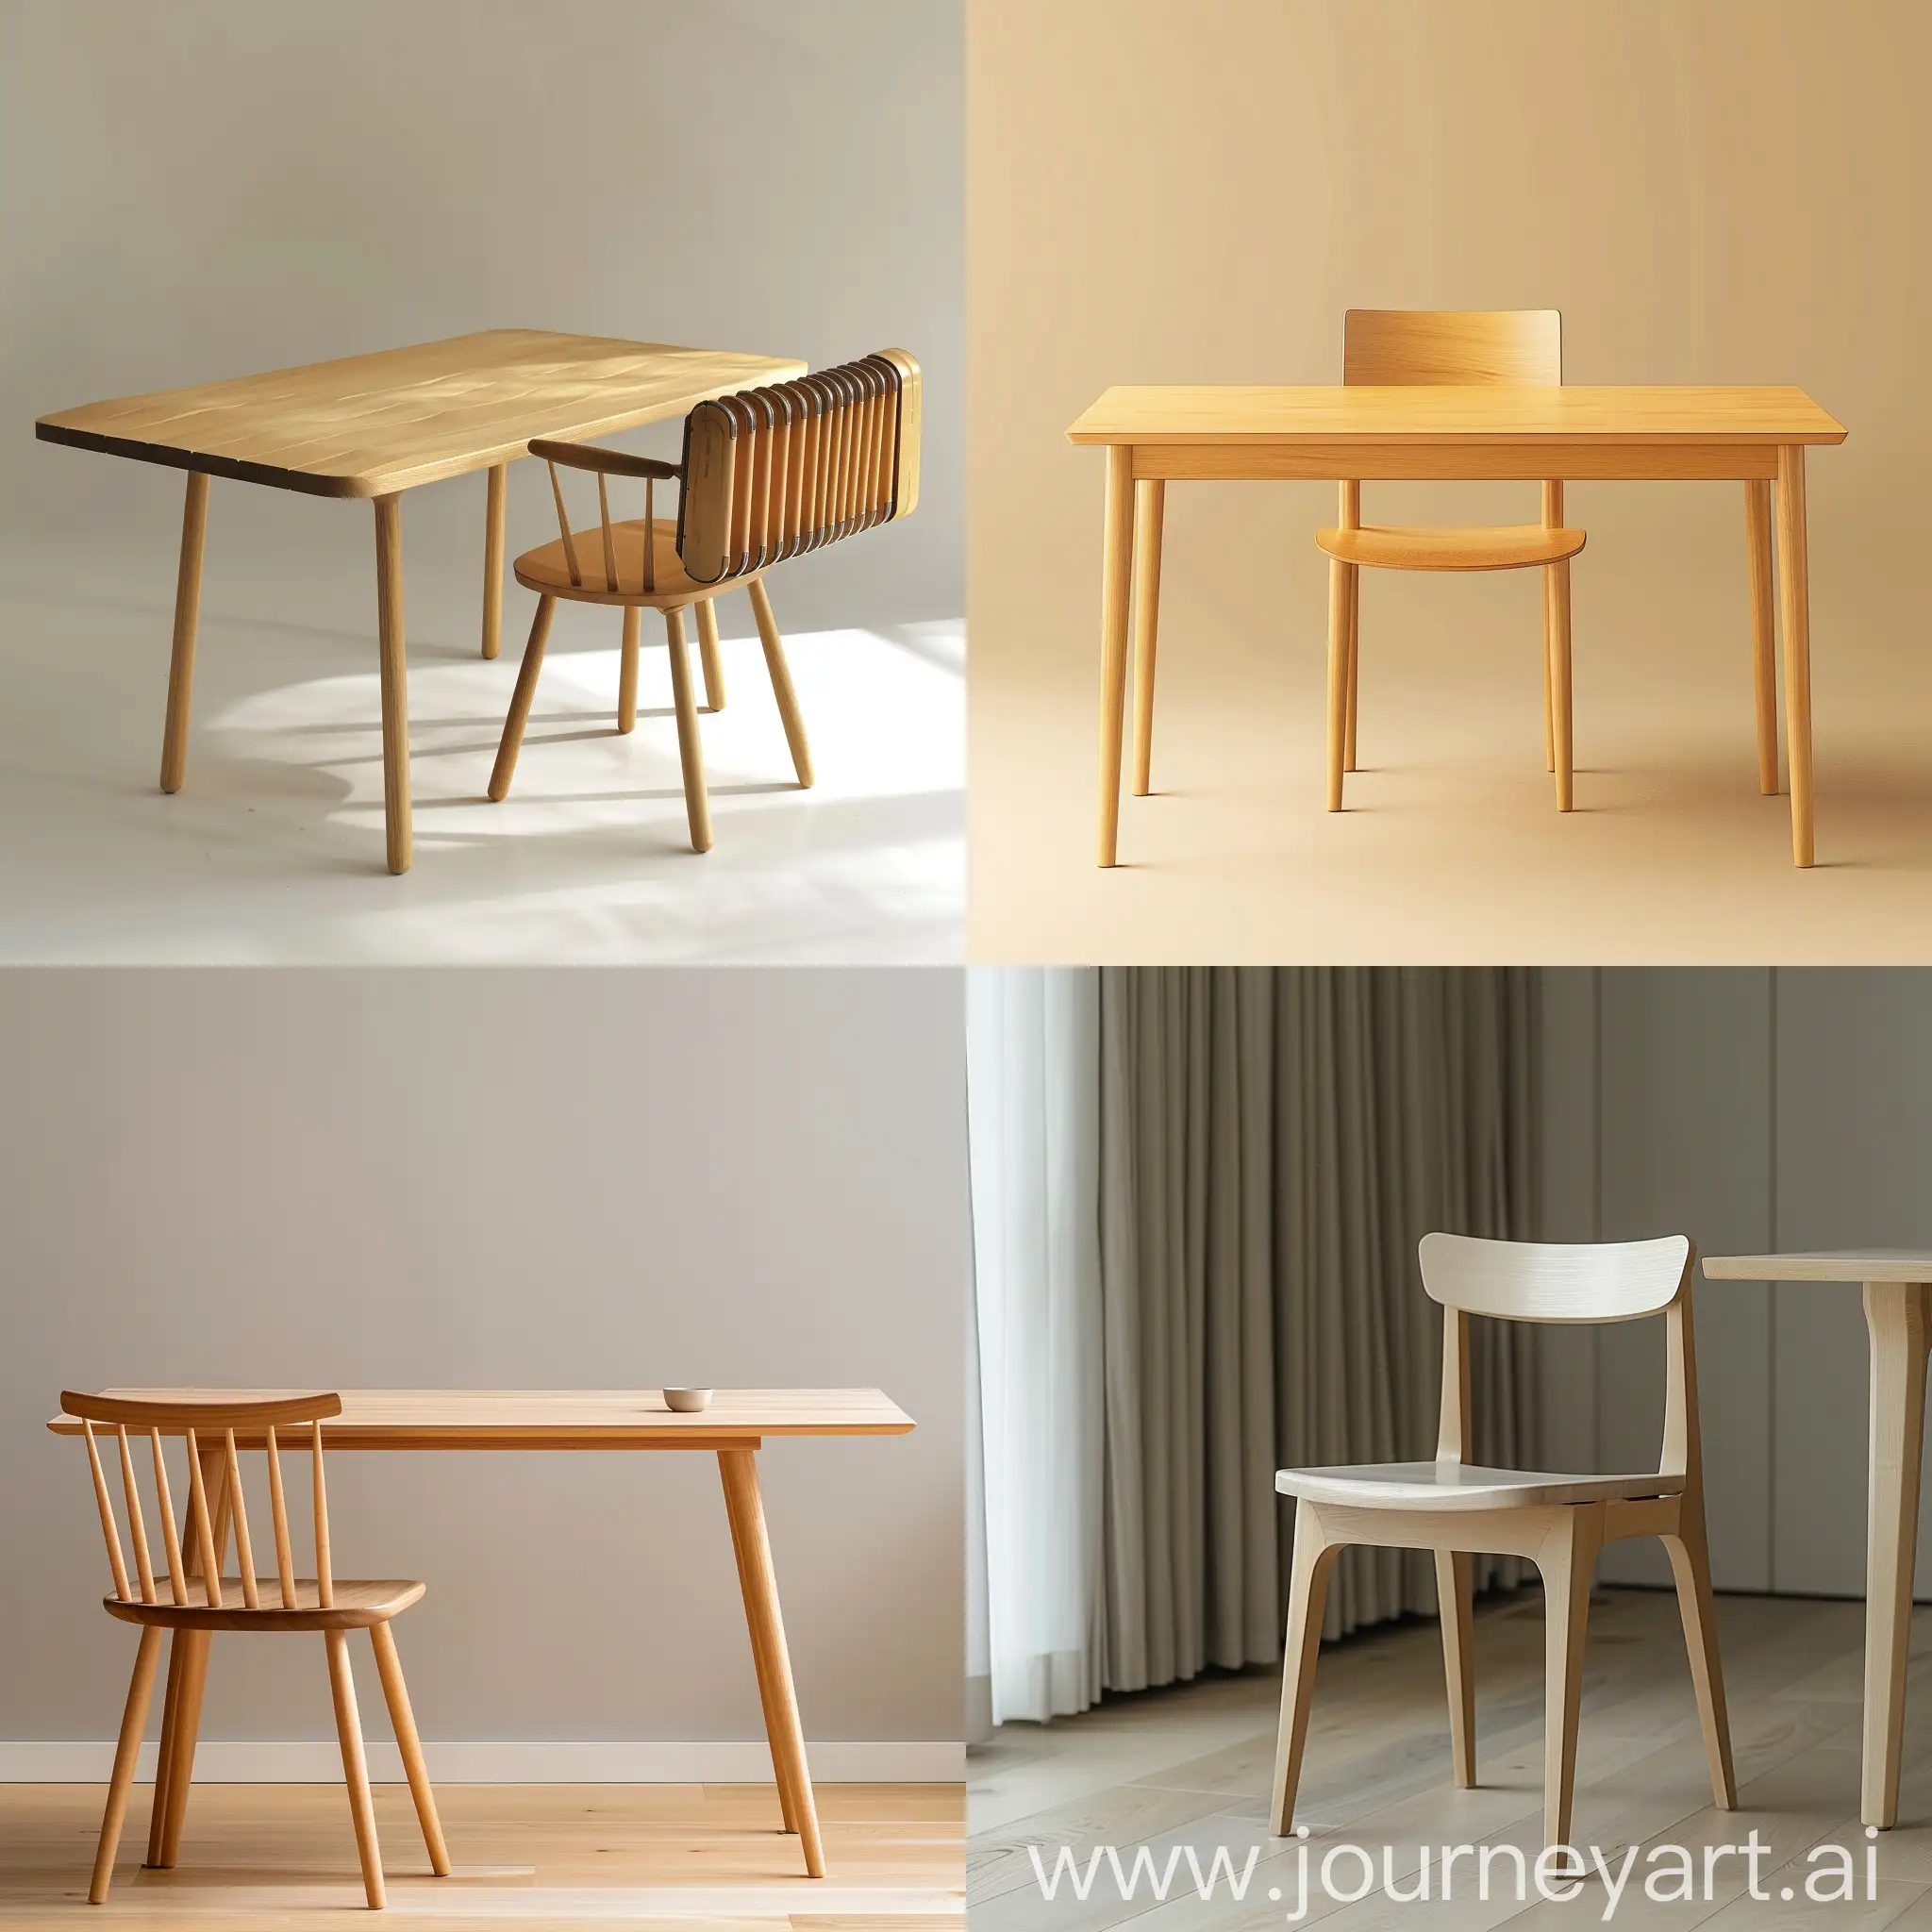 Minimalistic design of a dining table and chair, Japandi, Japanese minimalism, Scandinavian style, slender legs, and smooth lines. The accordion served as a prototype in shaping the form.